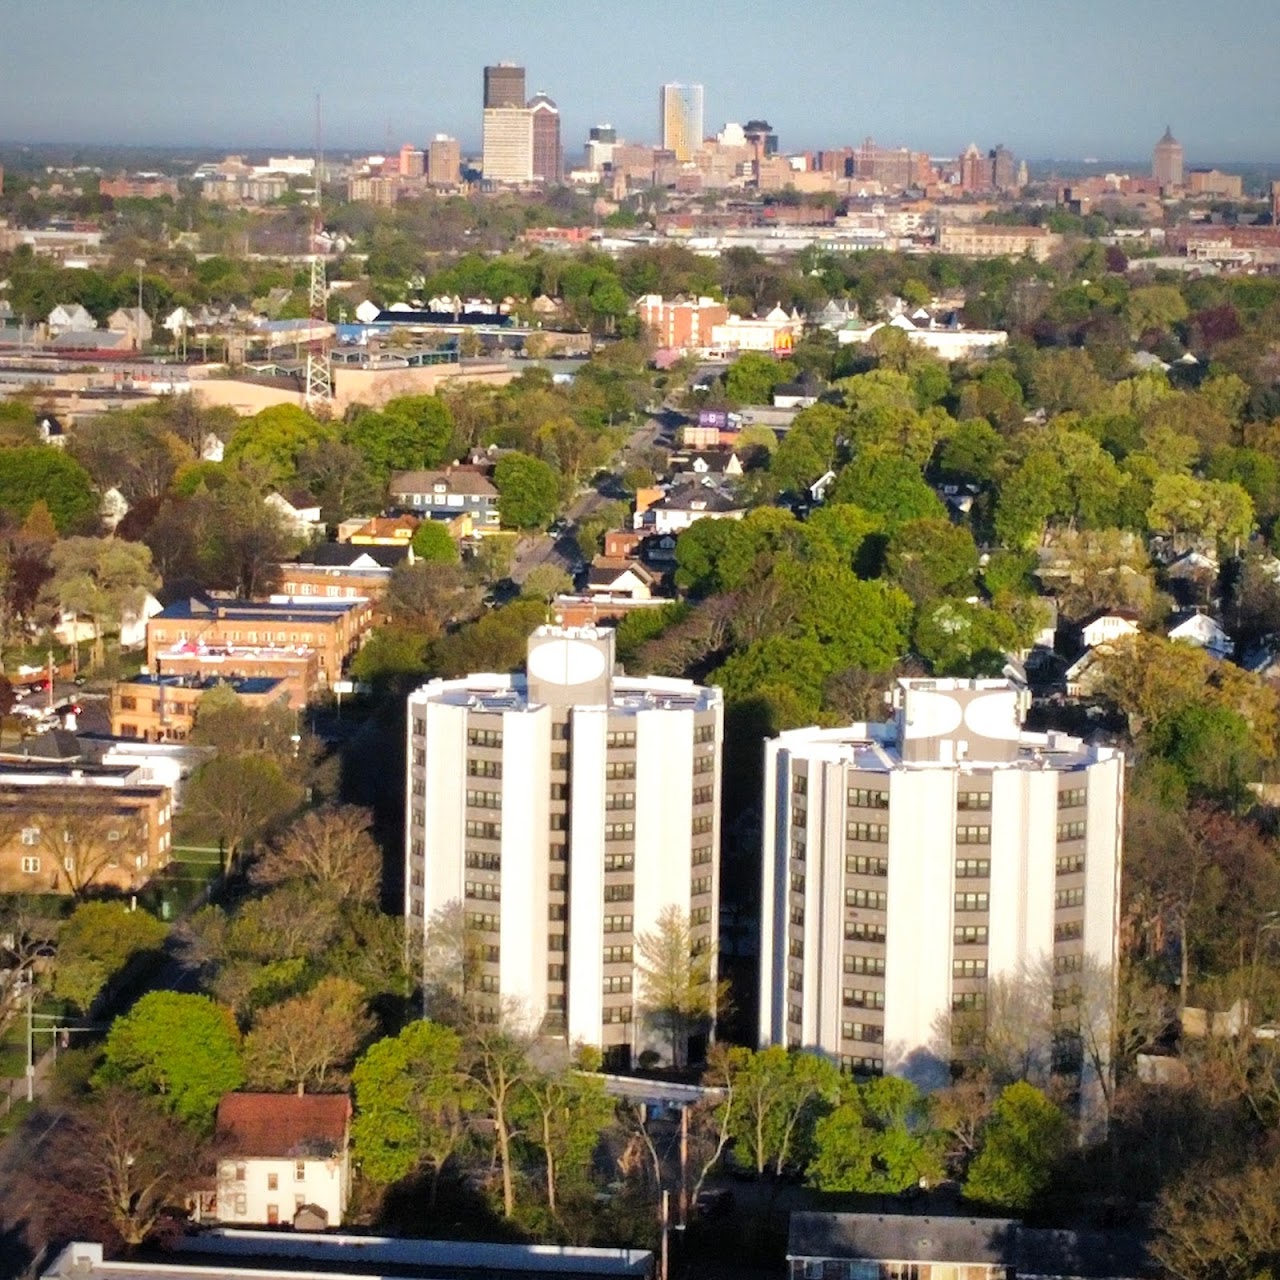 Photo of CEDARWOOD TOWERS. Affordable housing located at 2052 E MAIN ST ROCHESTER, NY 14609